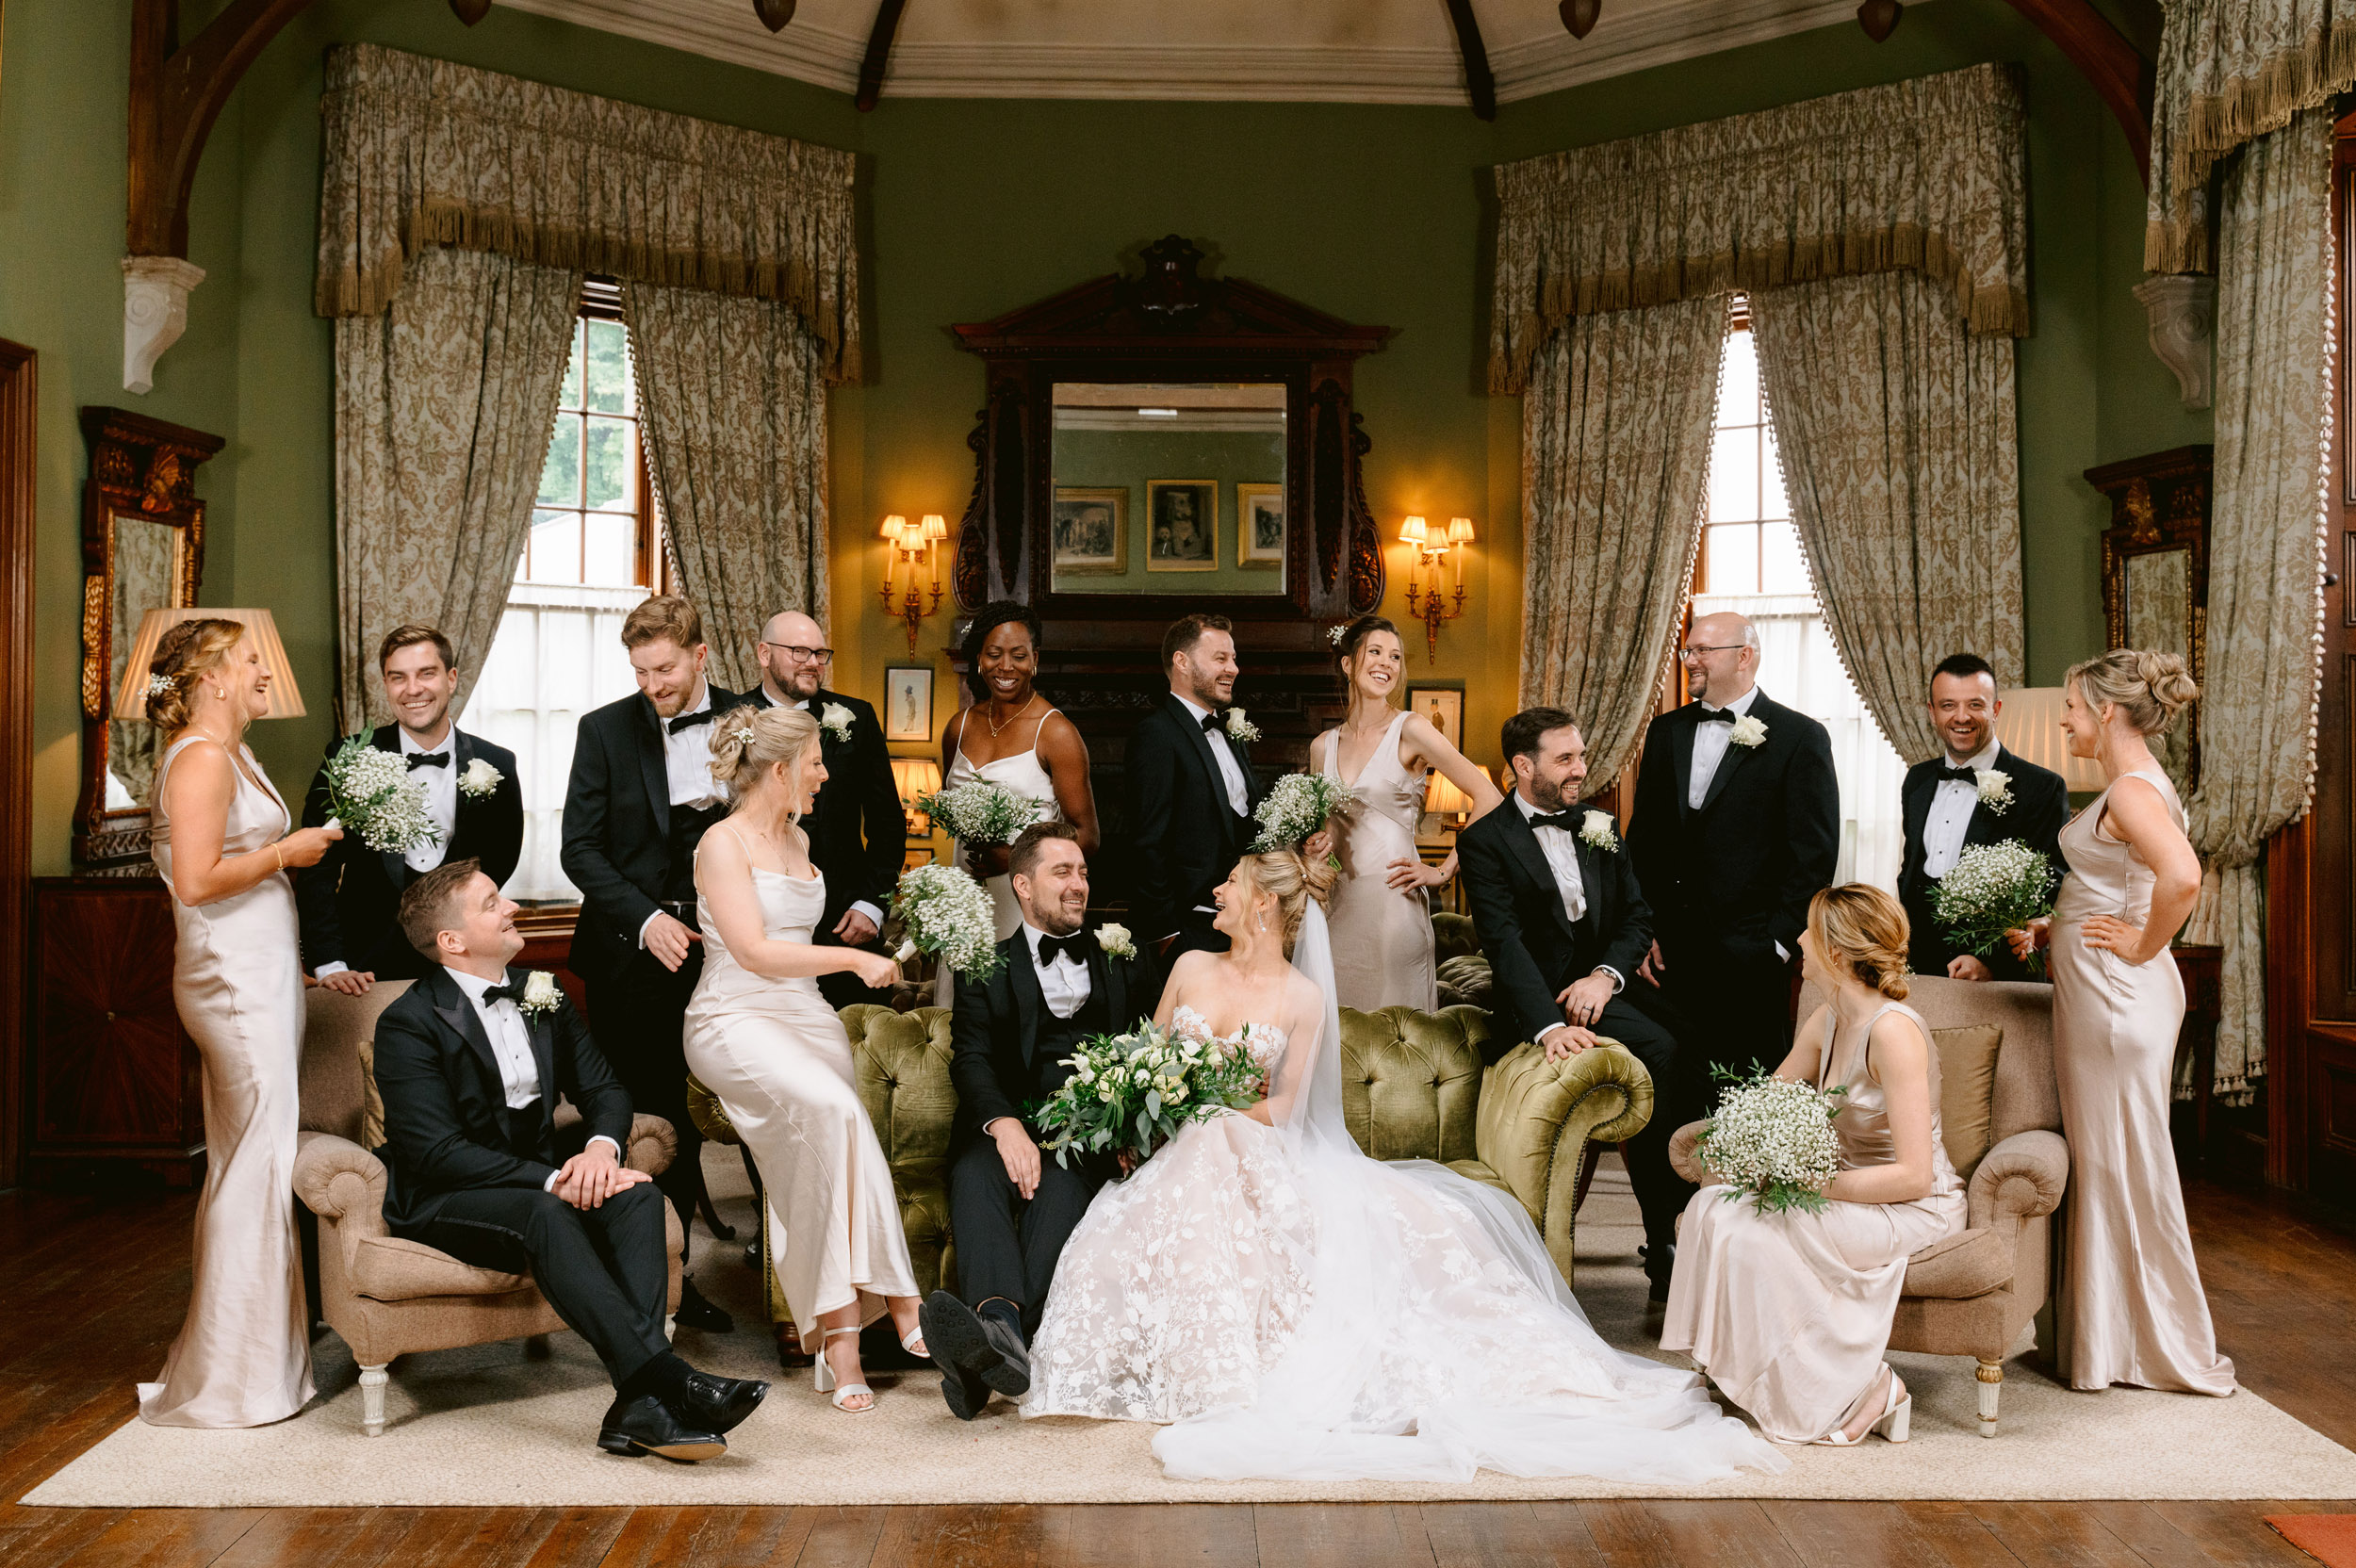 vanity fair style group editorial group photo of bridal party at castle leslie